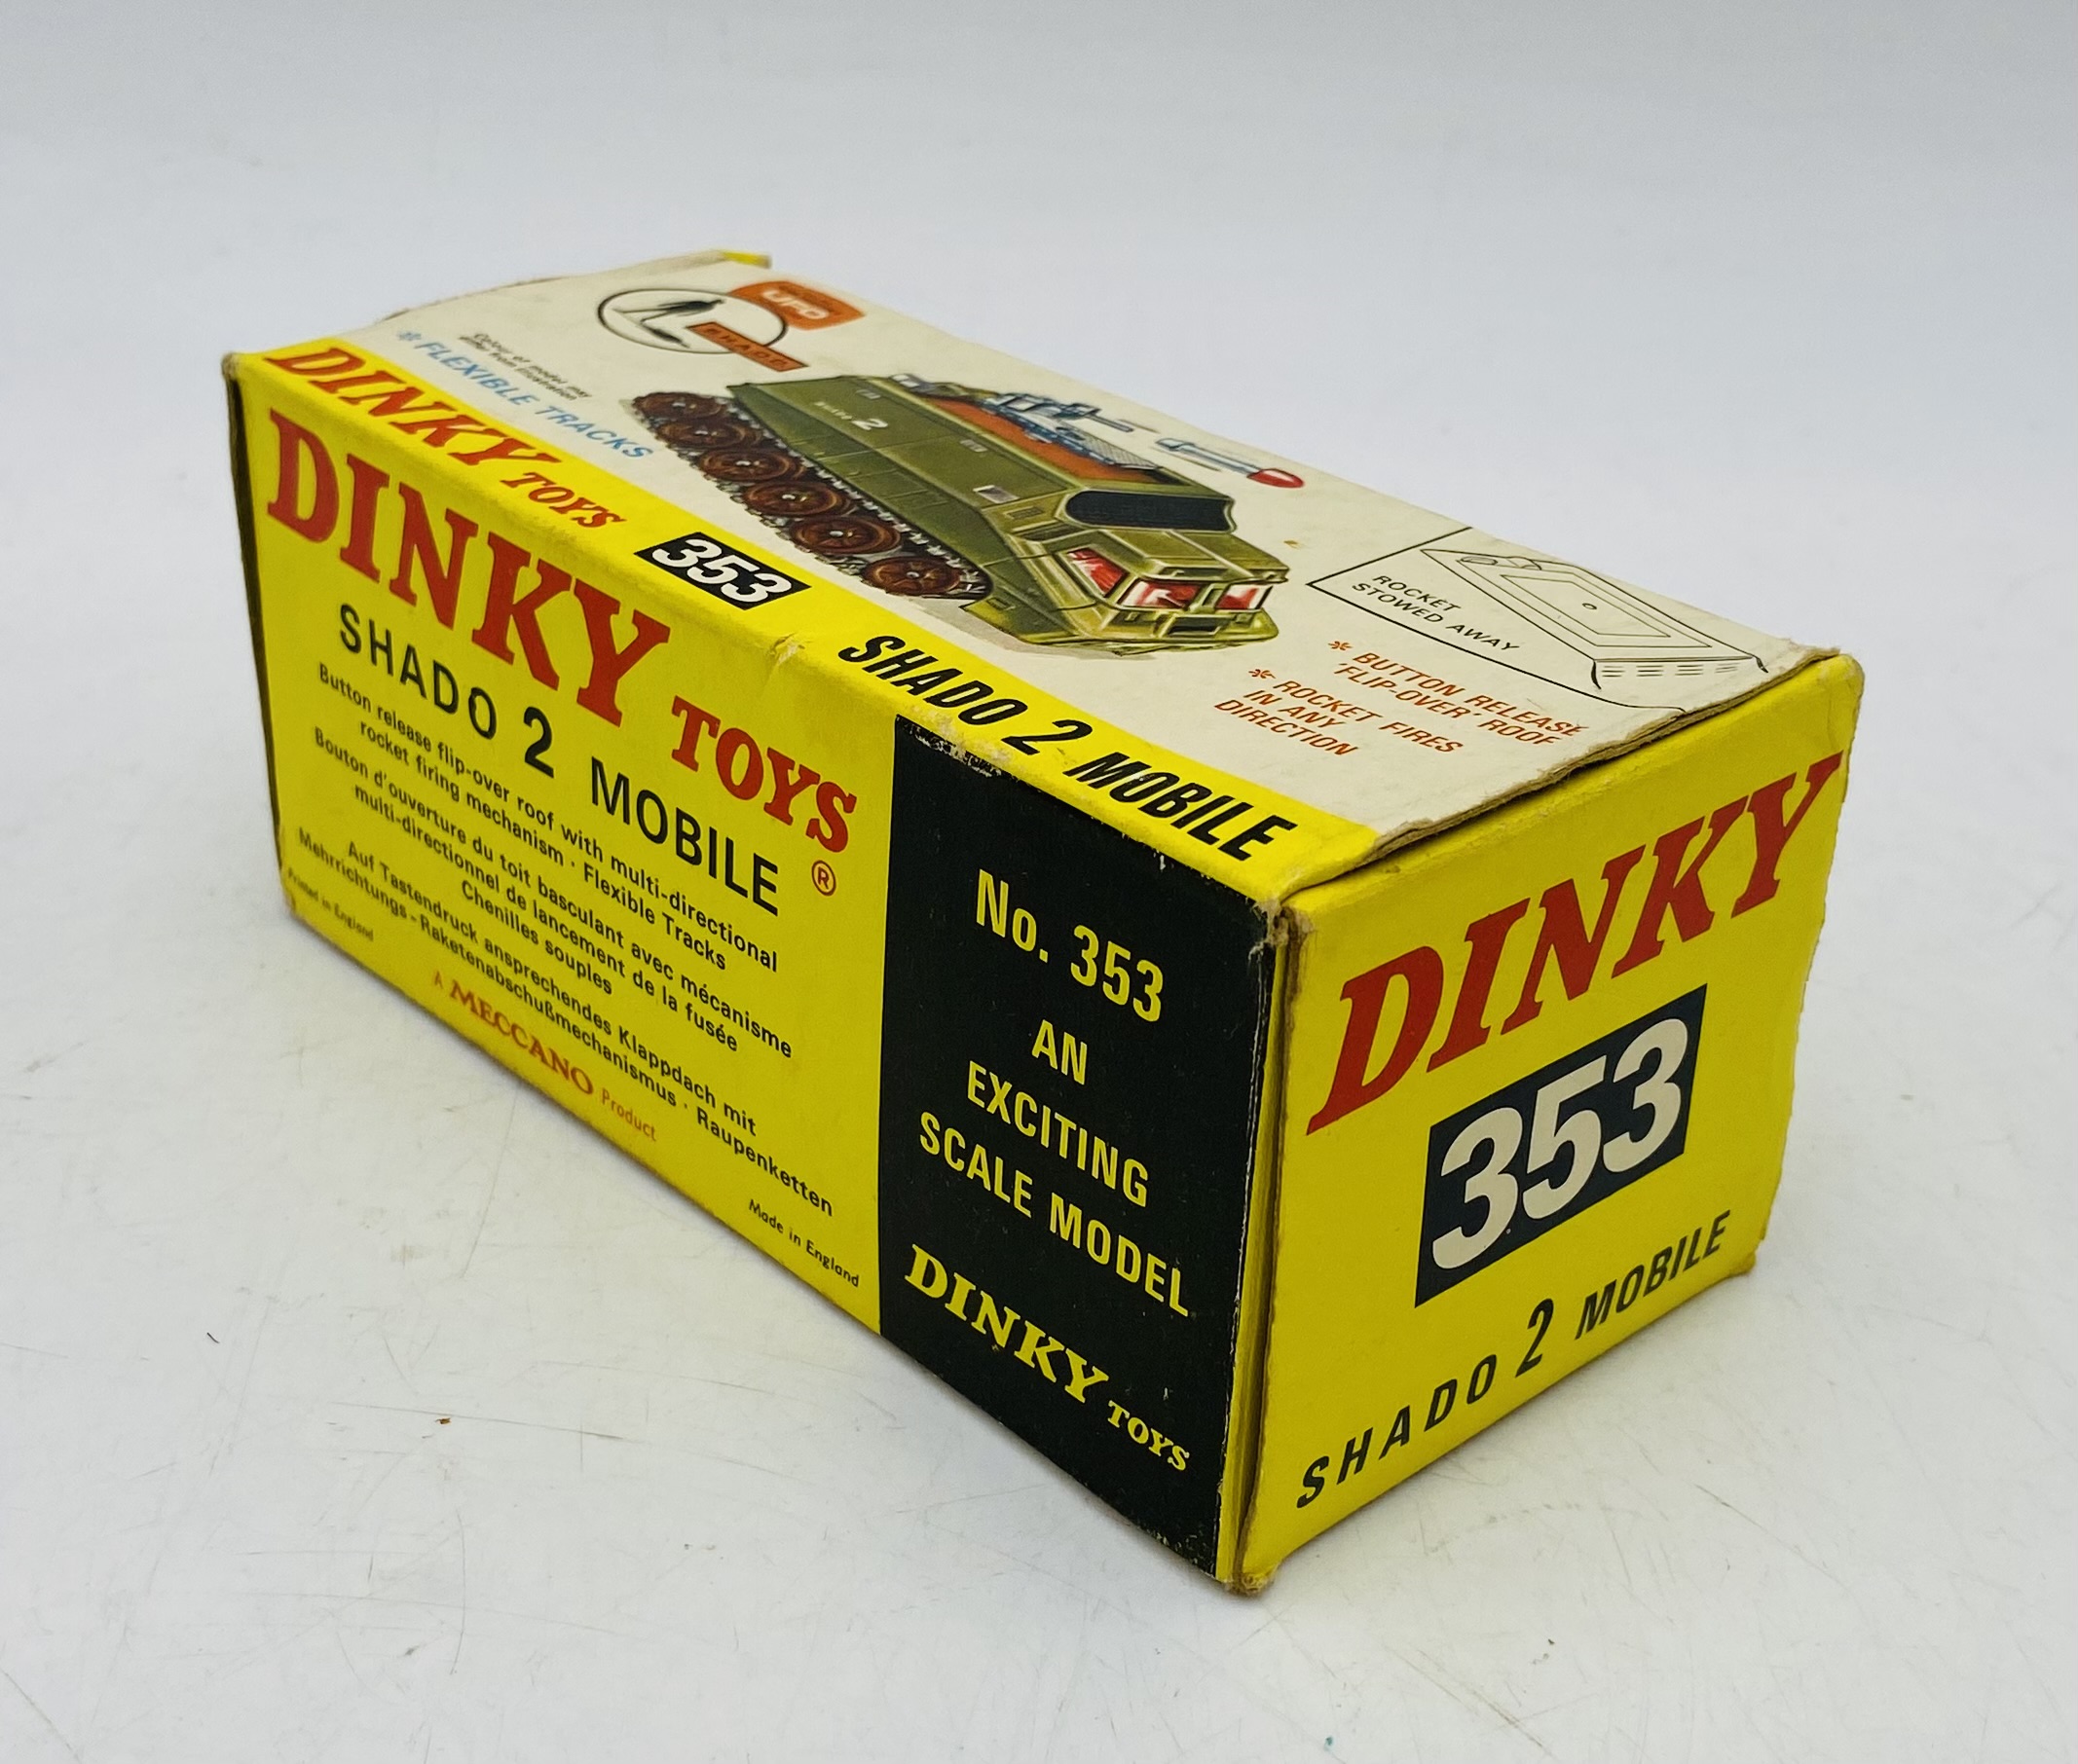 A vintage boxed Dinky Toys "Shado 2 Mobile" die-cast model (No 353) - Image 7 of 9